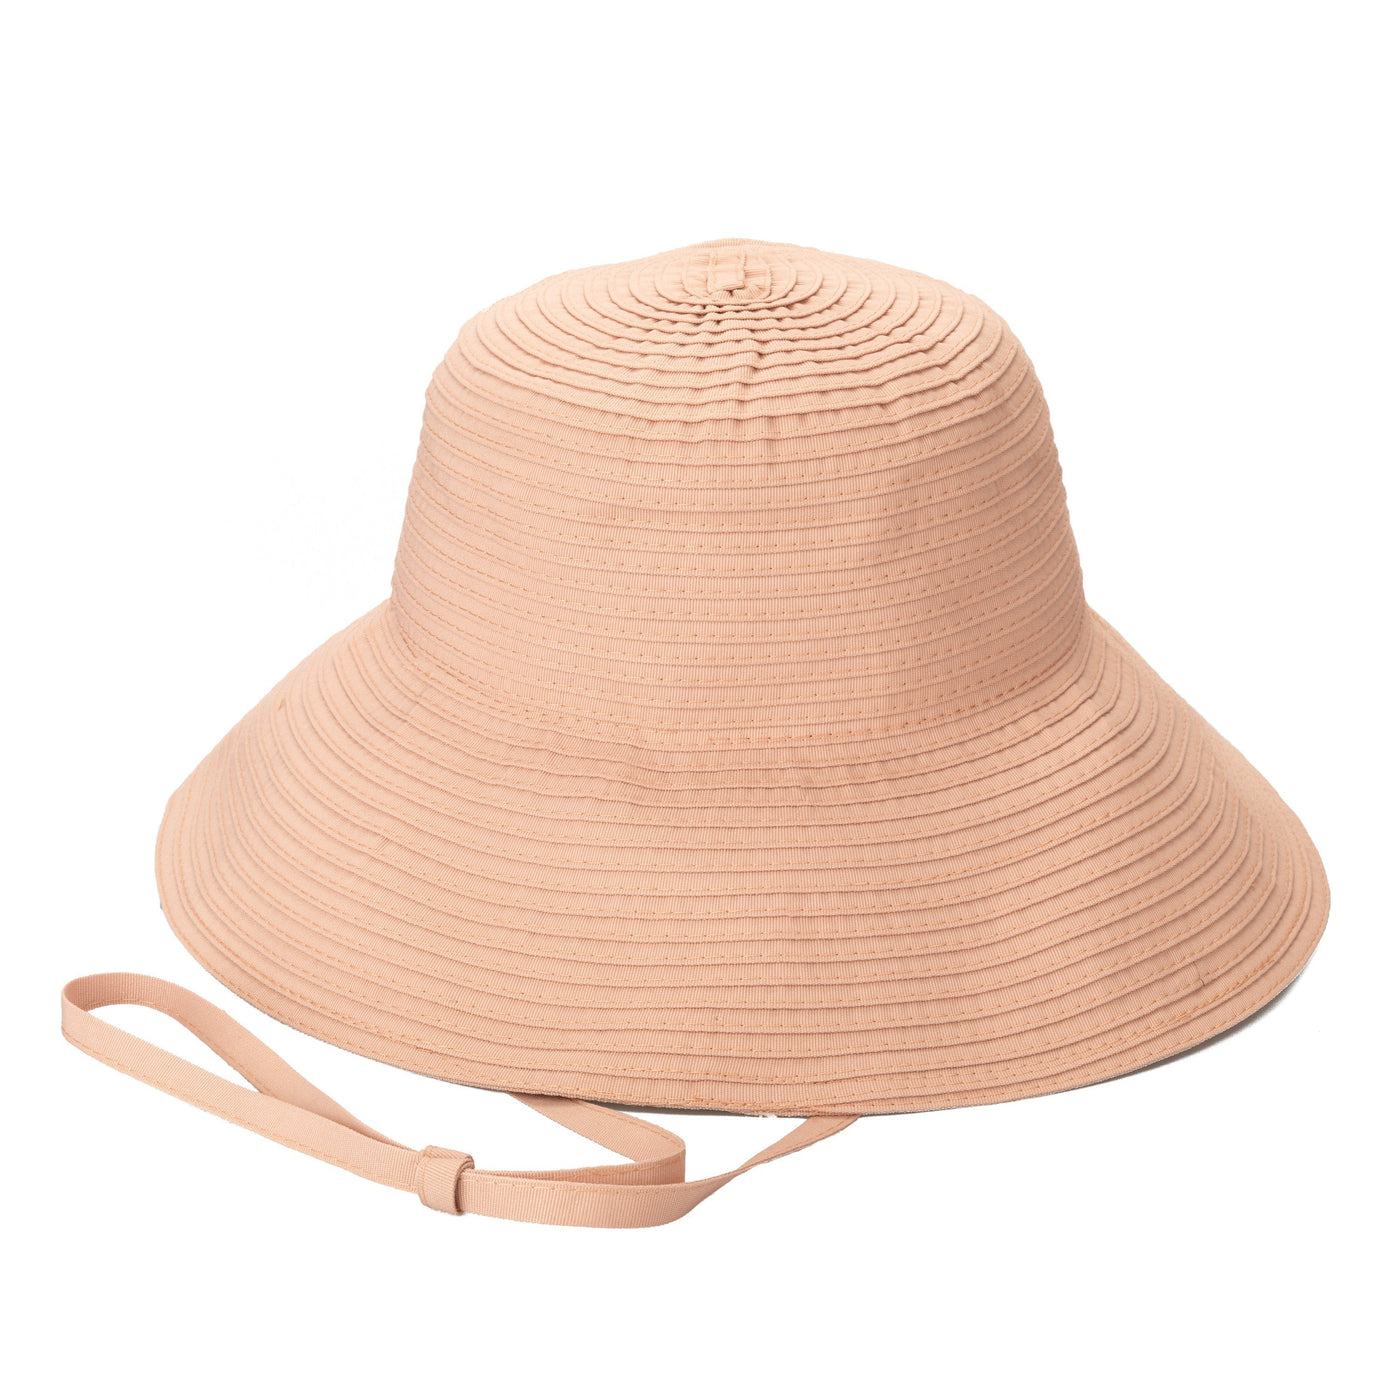 Women's Ribbon Sun Hat with Removable Chin Cord – San Diego Hat Company